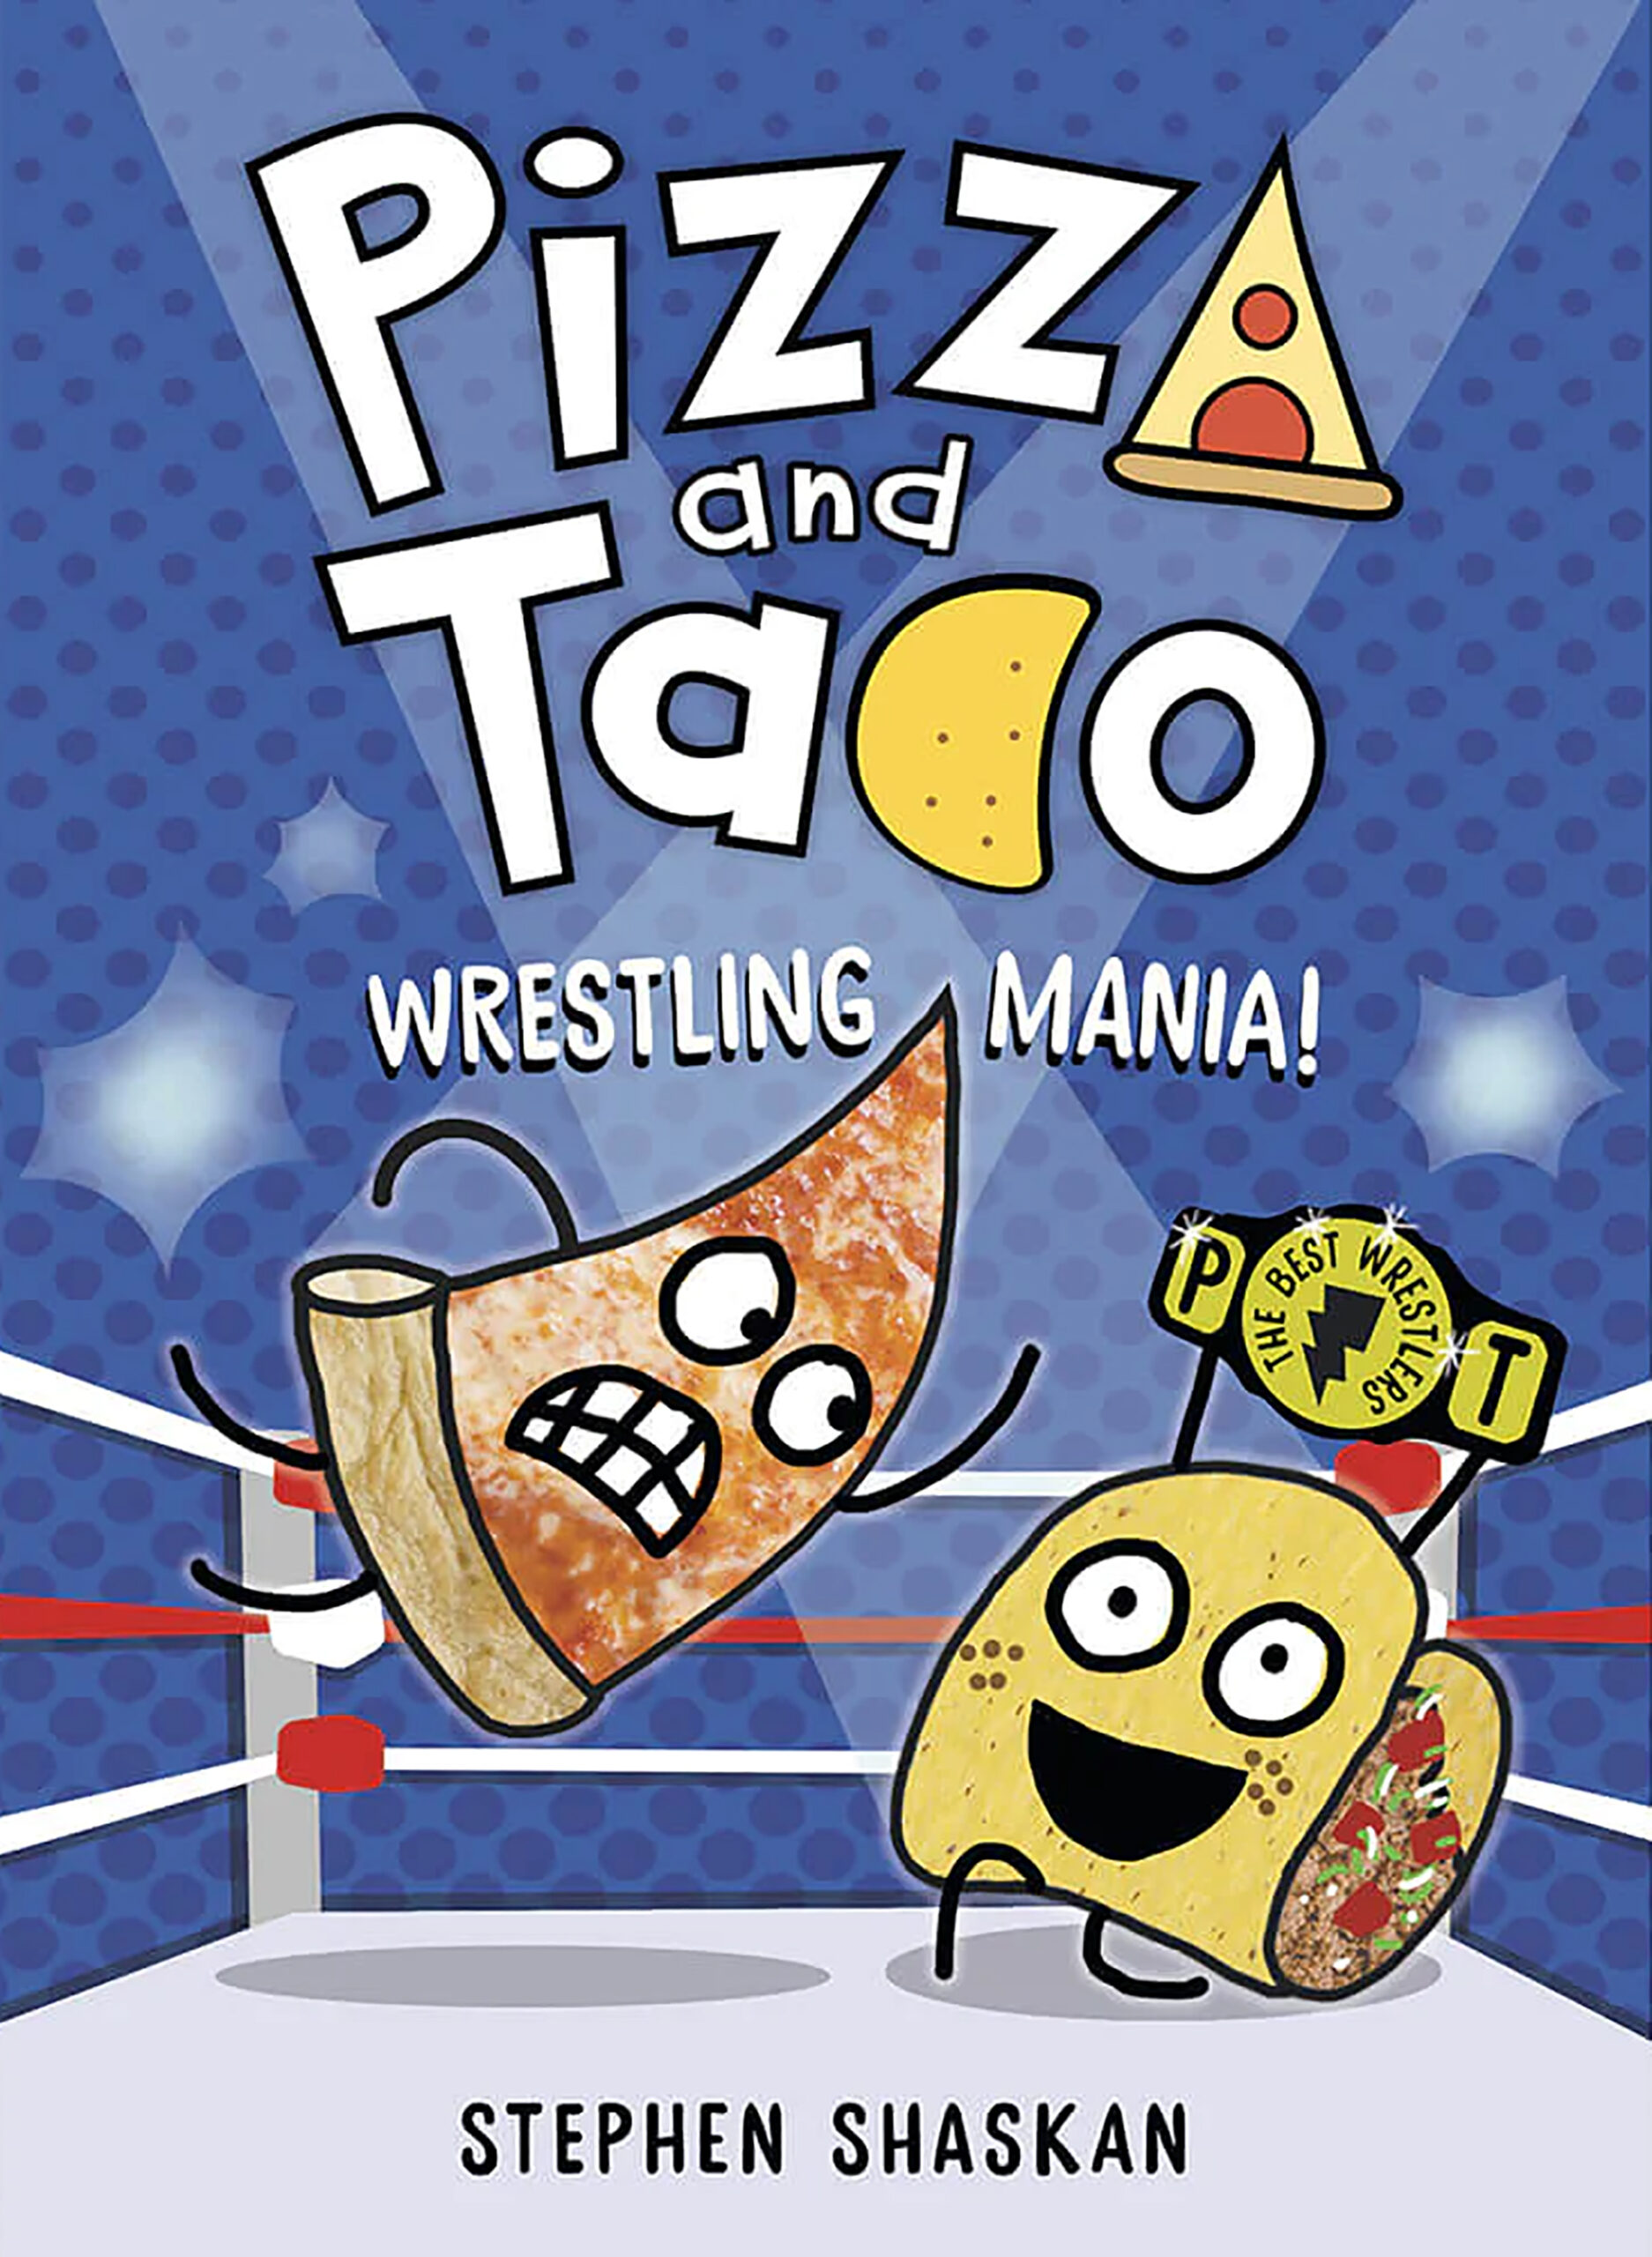 Pizza and Taco Wrestling Mania! Book Cover